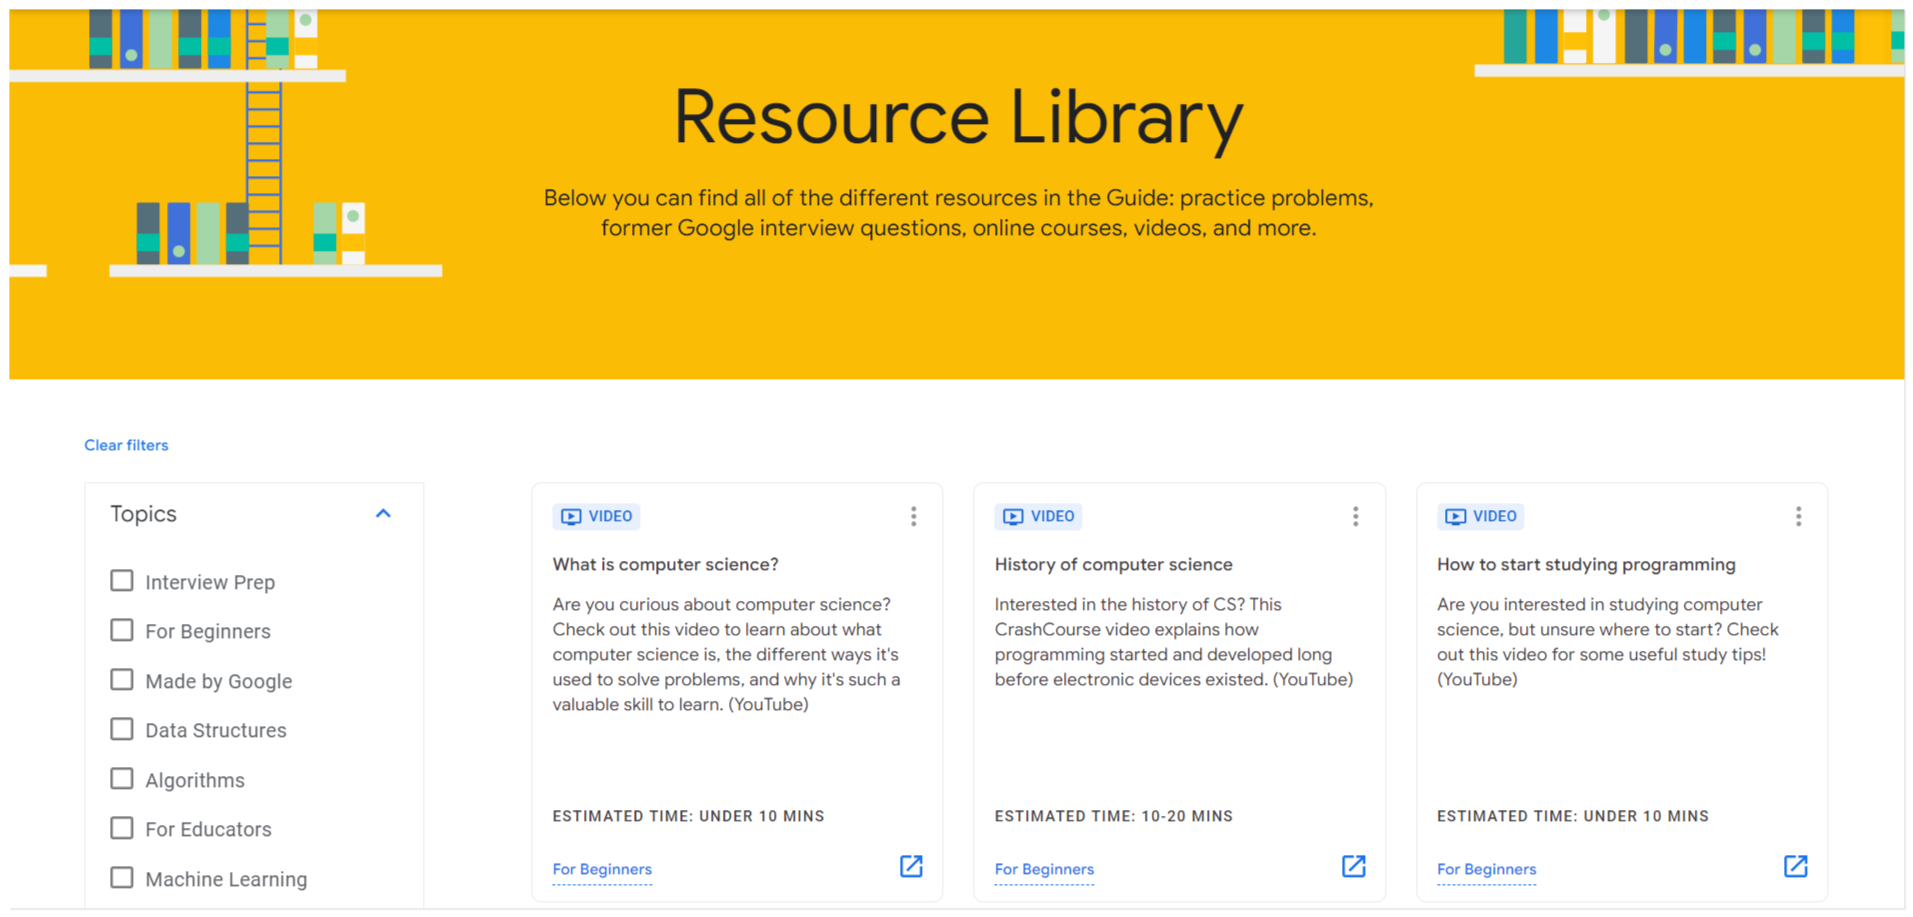 Resource Library by Google